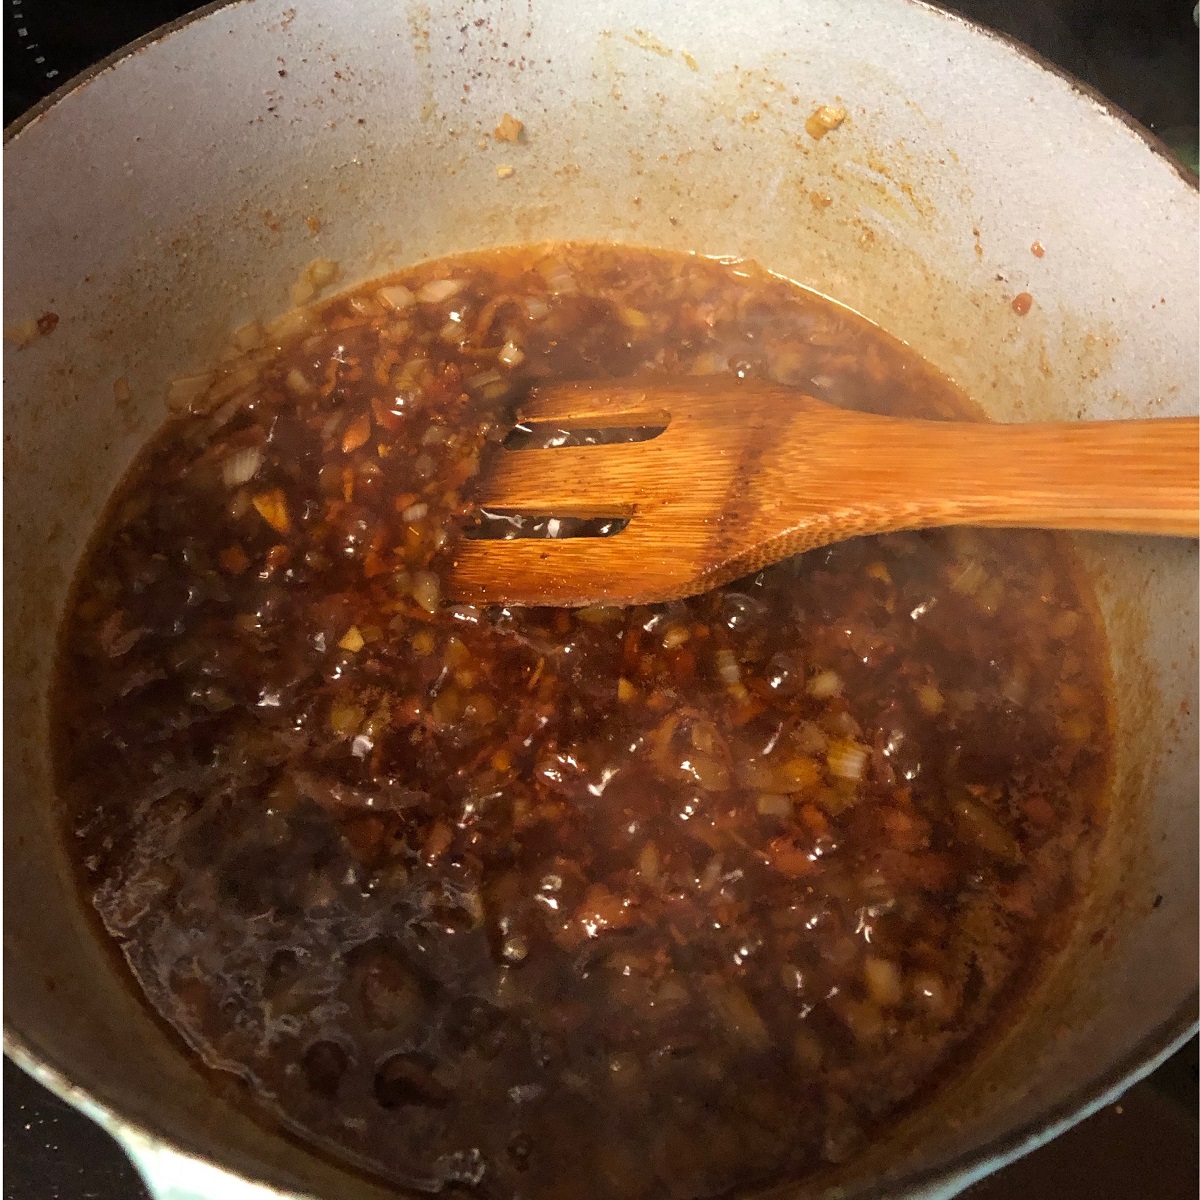 Cook, stirring often, until reduced and thickened into a “Jam” type of consistency